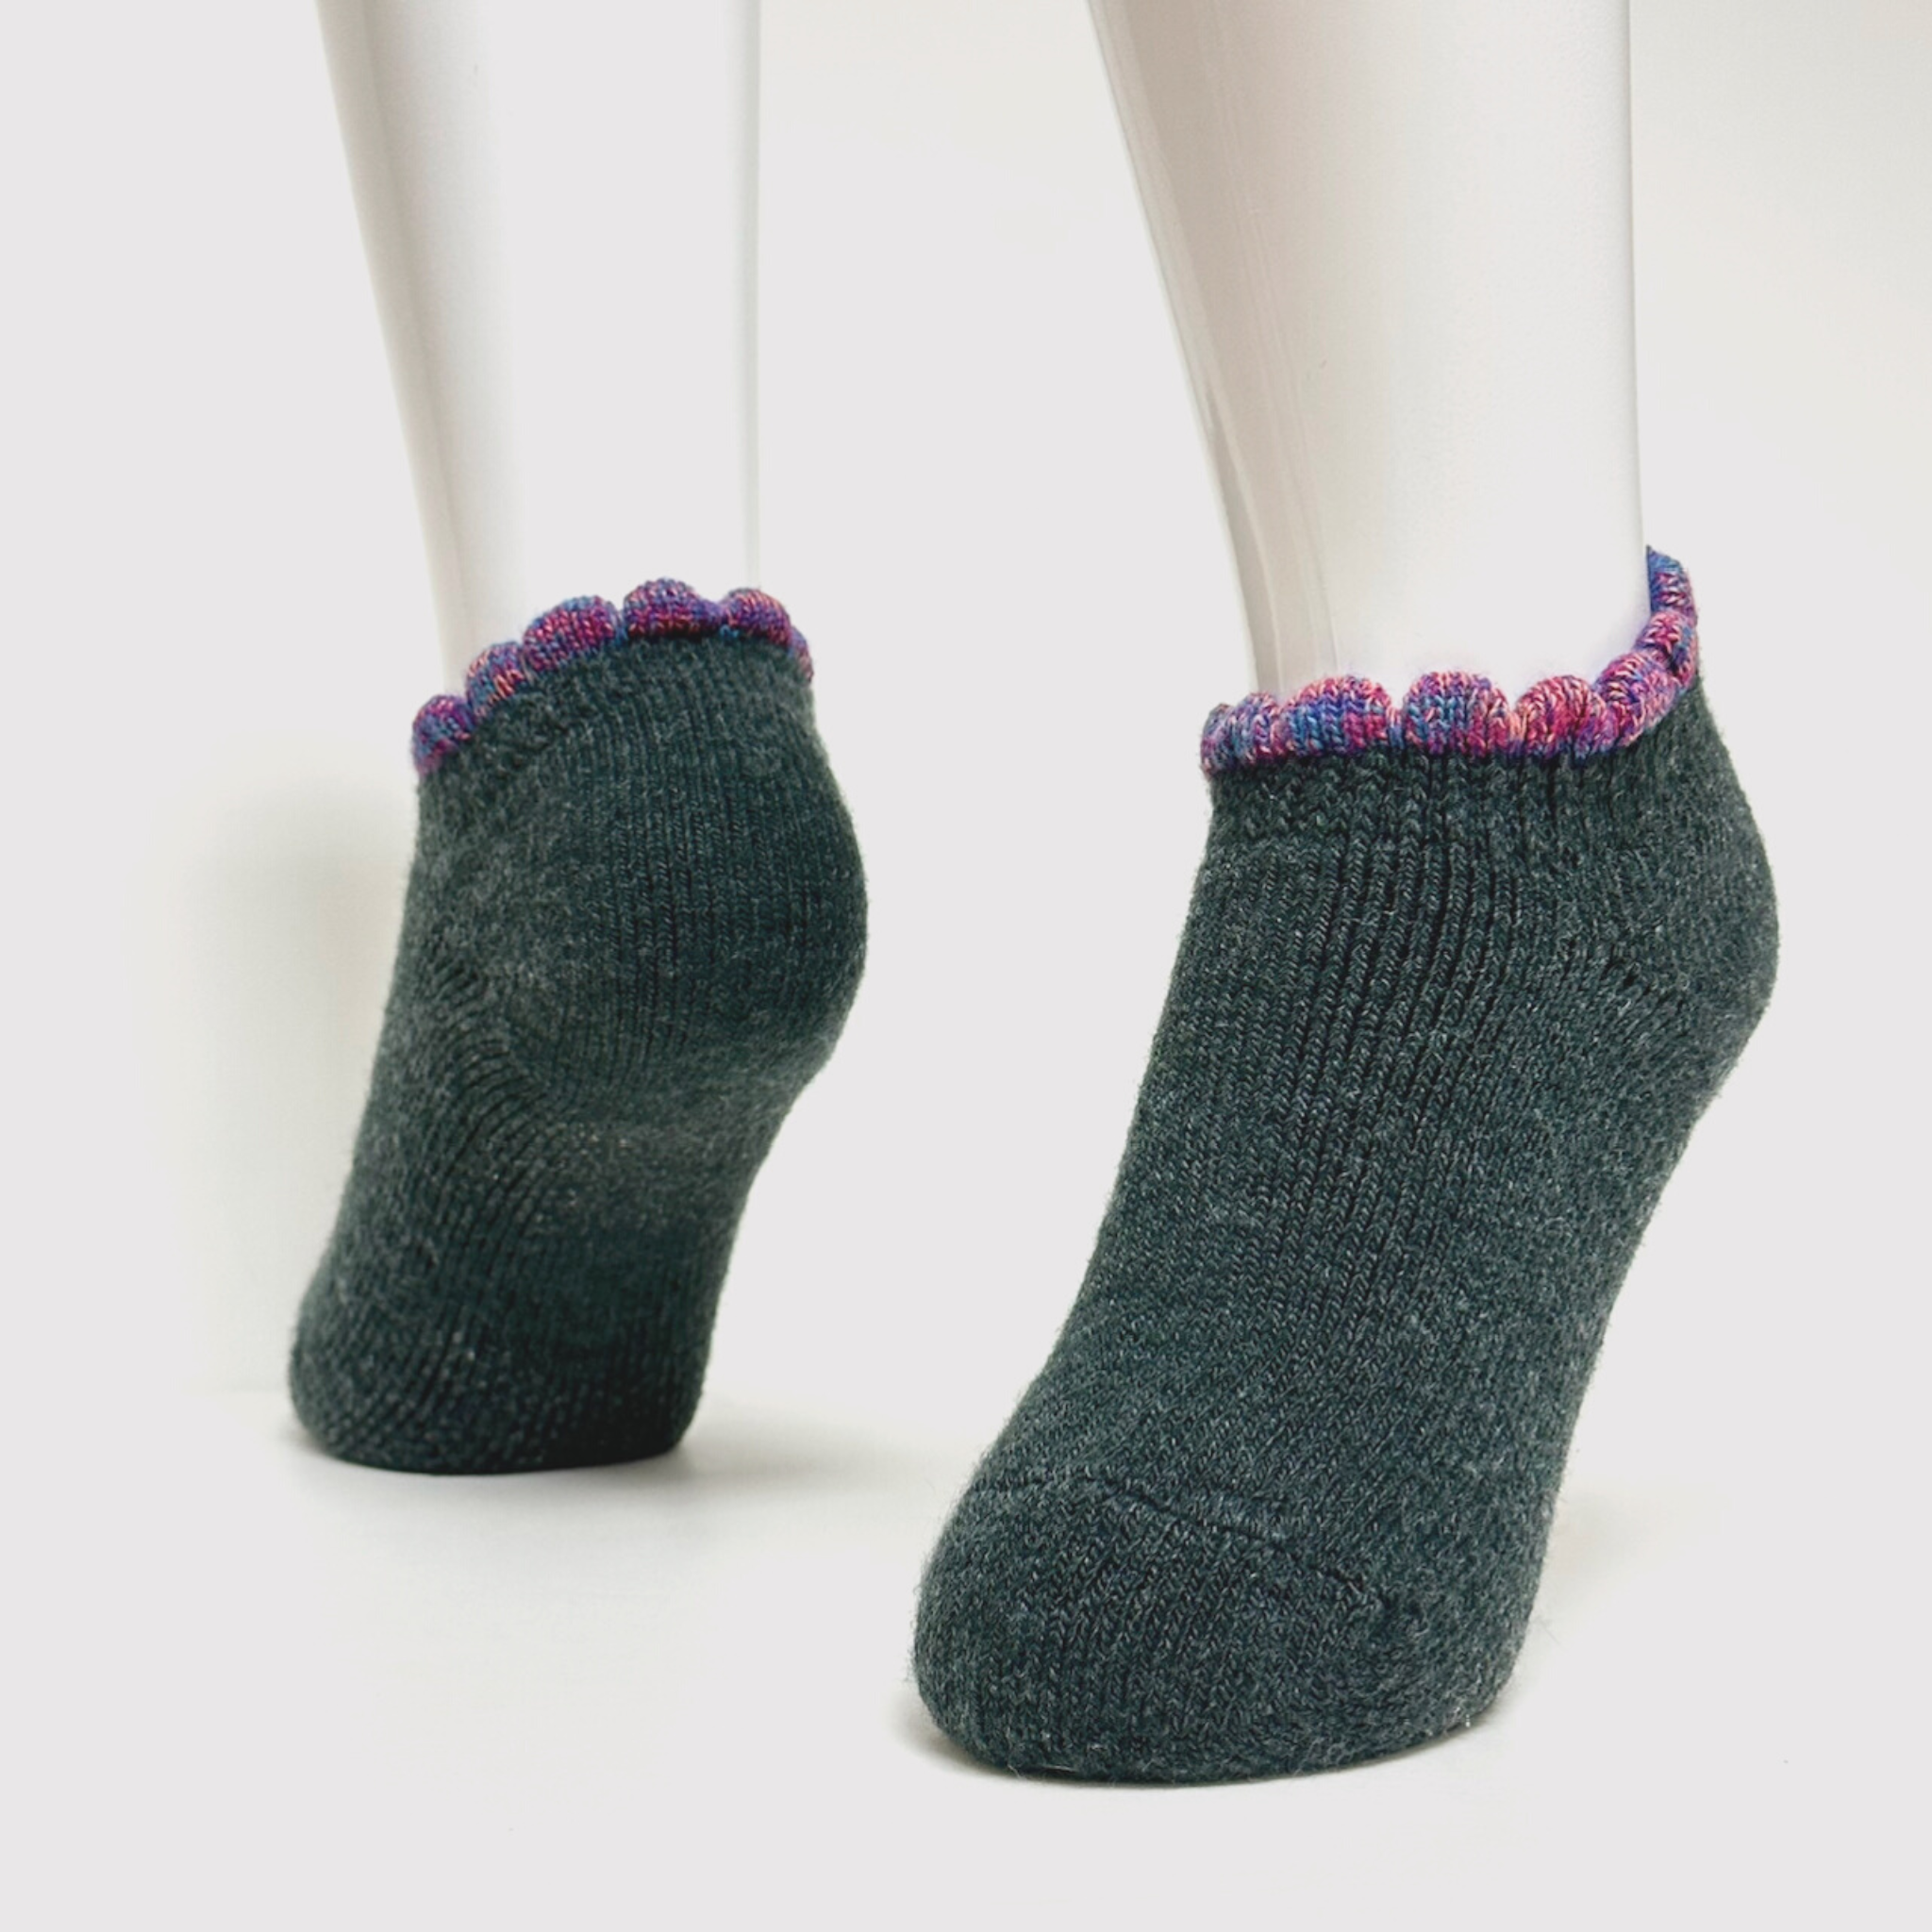 CHERRYSTONE® Thermal Wool Blend Slipper Socks with Grips | Size Medium | Charcoal with  Mixed Color Picot Trim - CHERRYSTONEstyle